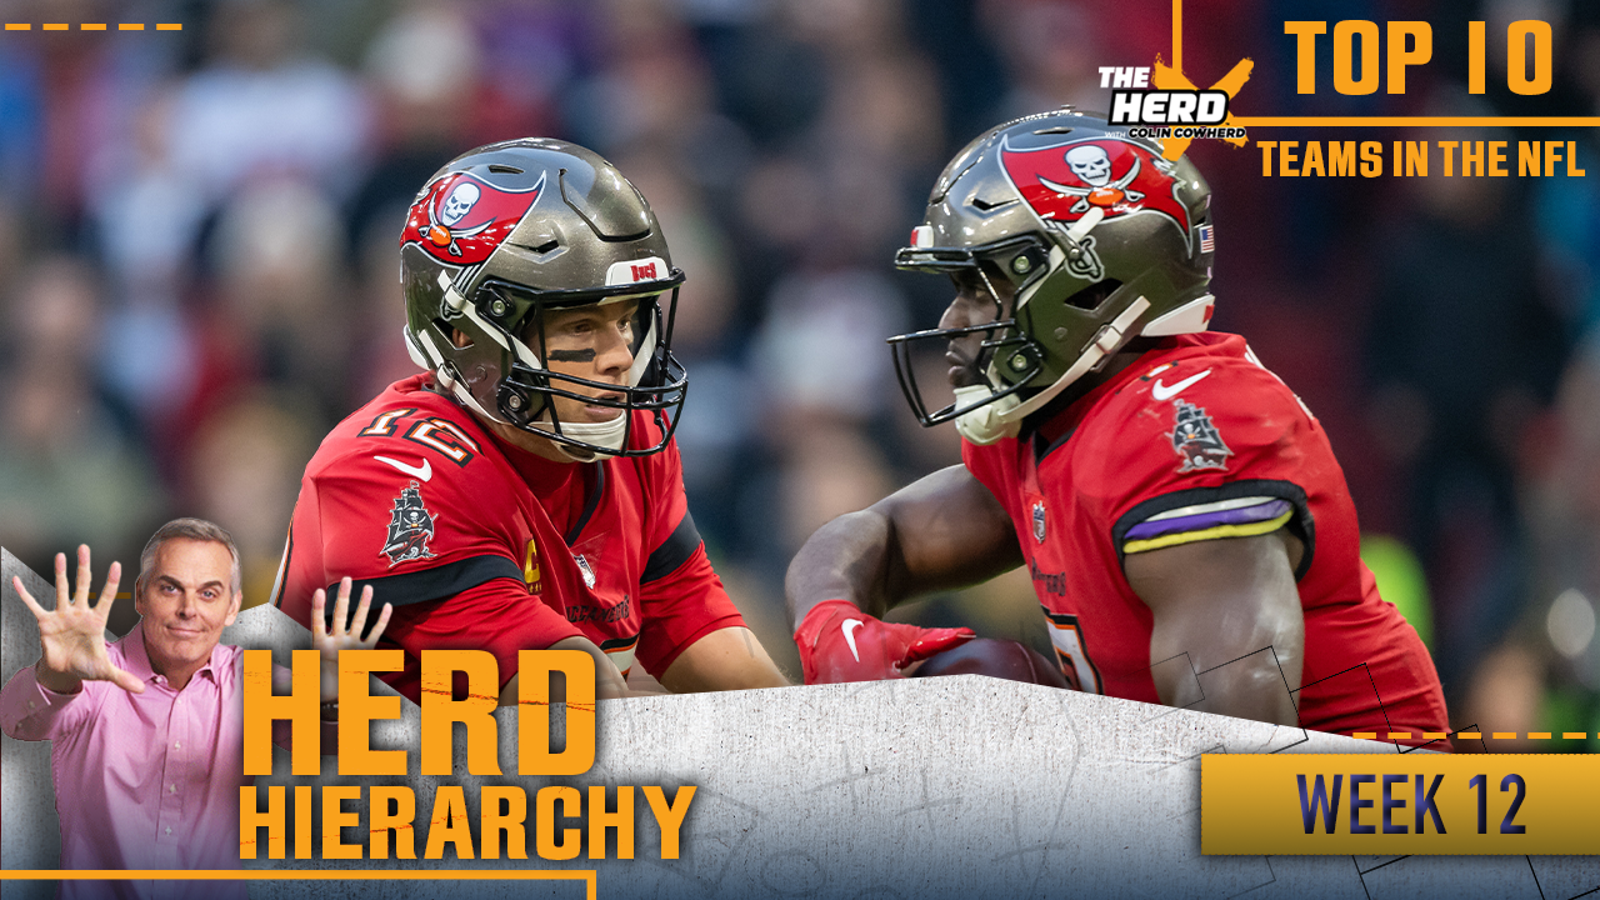 Hierarchy of the Herd: Bucs bounce back, 49ers climb Colin's Week 12 Top 10 